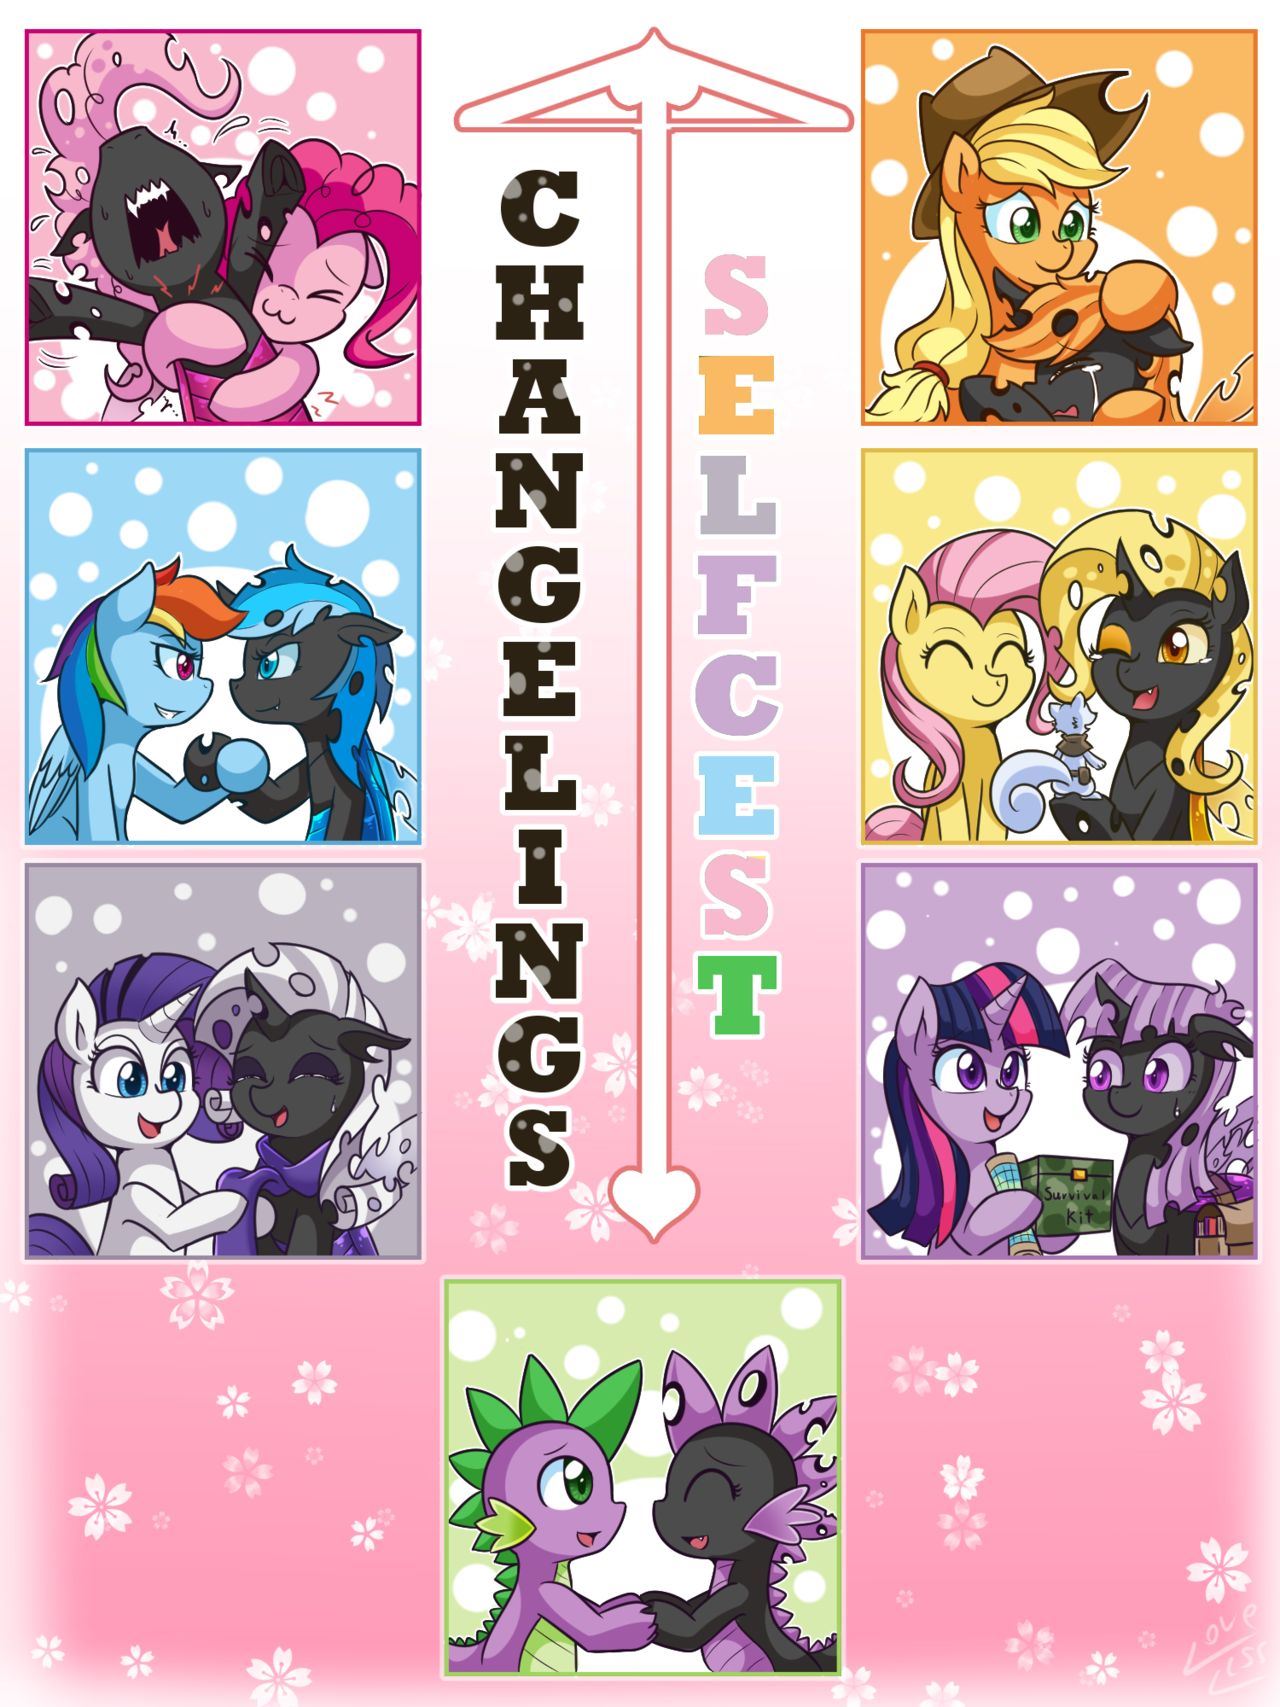 Vavacung Changeling Selfcest My Little Pony Friendship is Magic 00